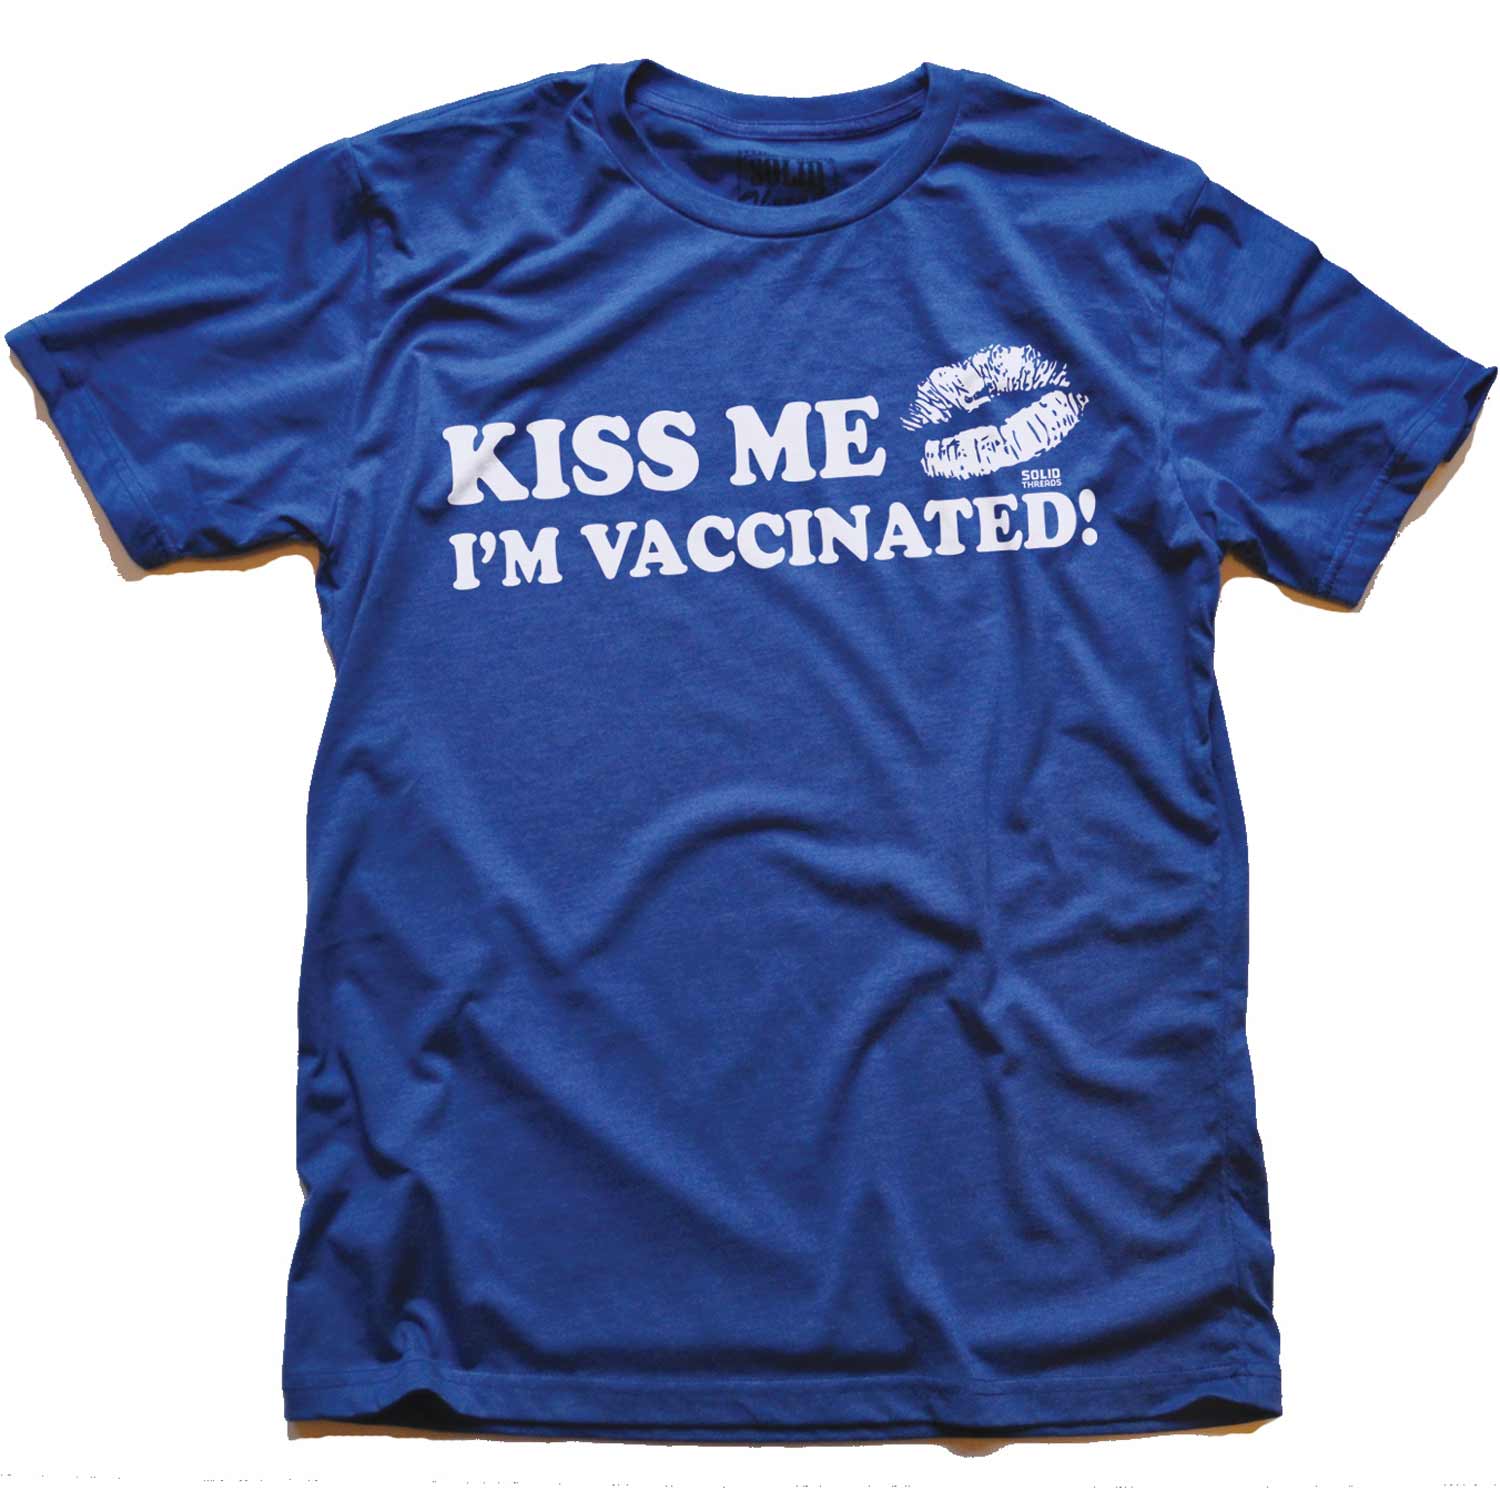 Men's Kiss Me I'm Vaccinated Cool Vintage Graphic Tee Proceeds Support Science | Solid Threads